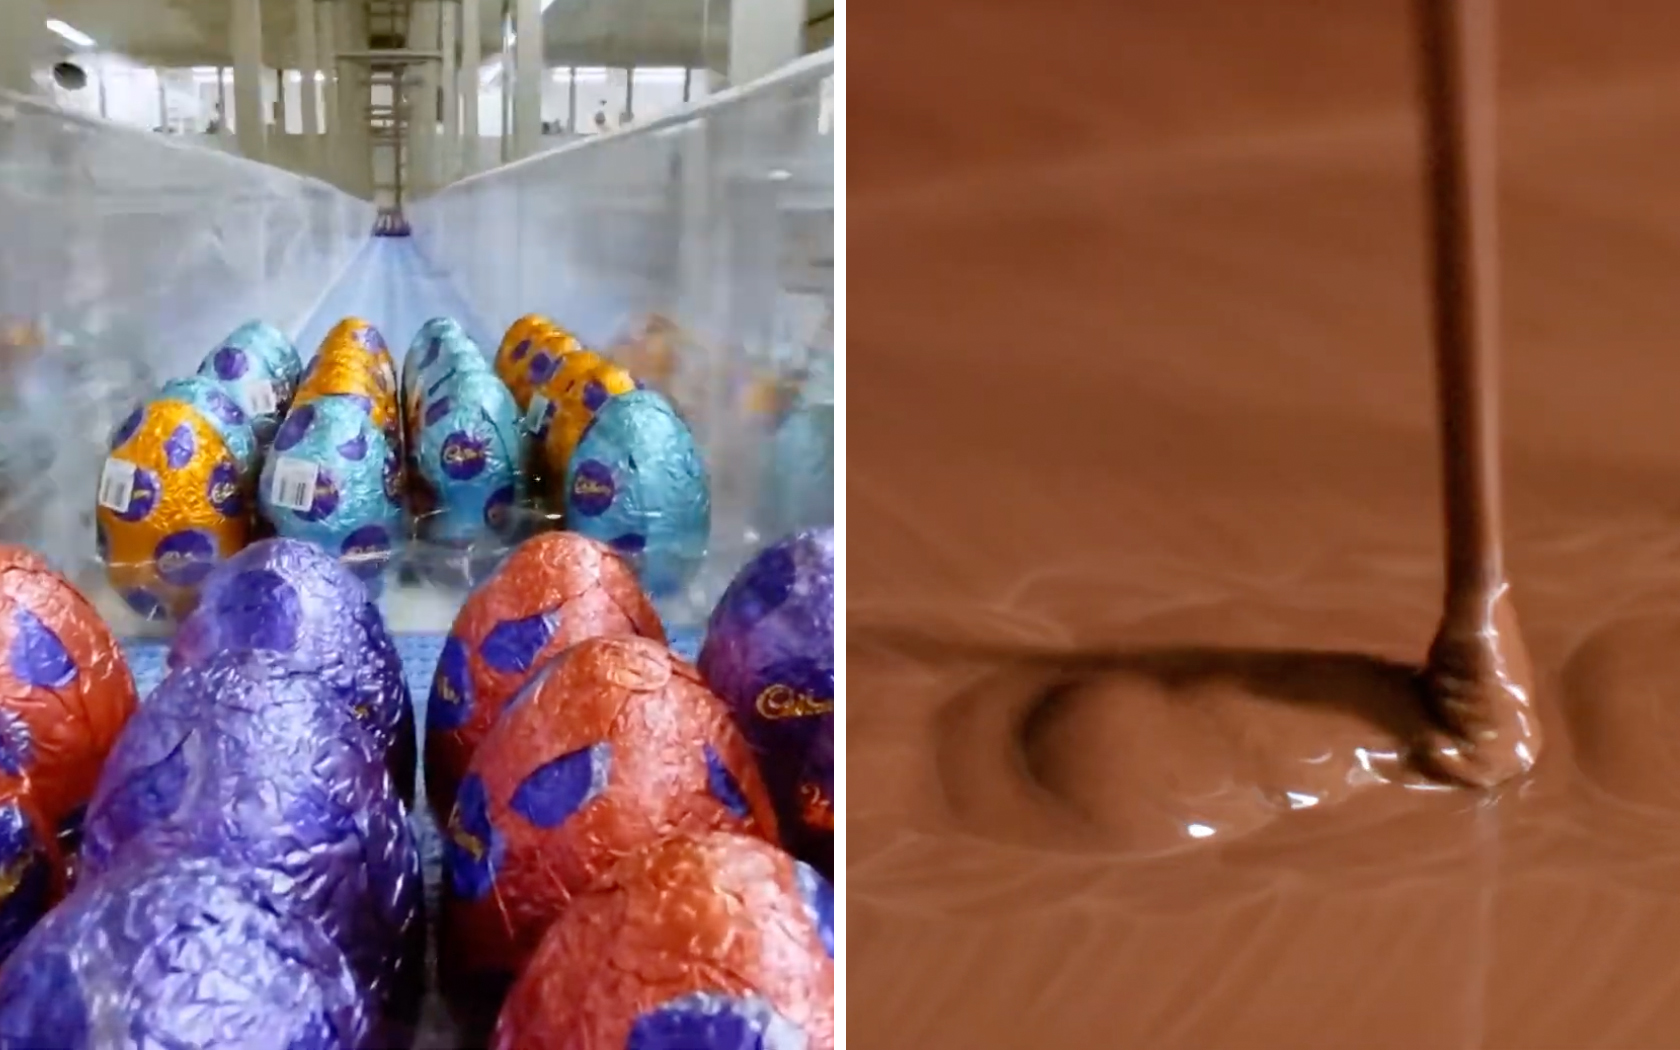 Scenes from the trailer of 'The Chocolate Factory: Inside Cadbury Australia', the new Slow TV show from SBS, premiering in April 2020.